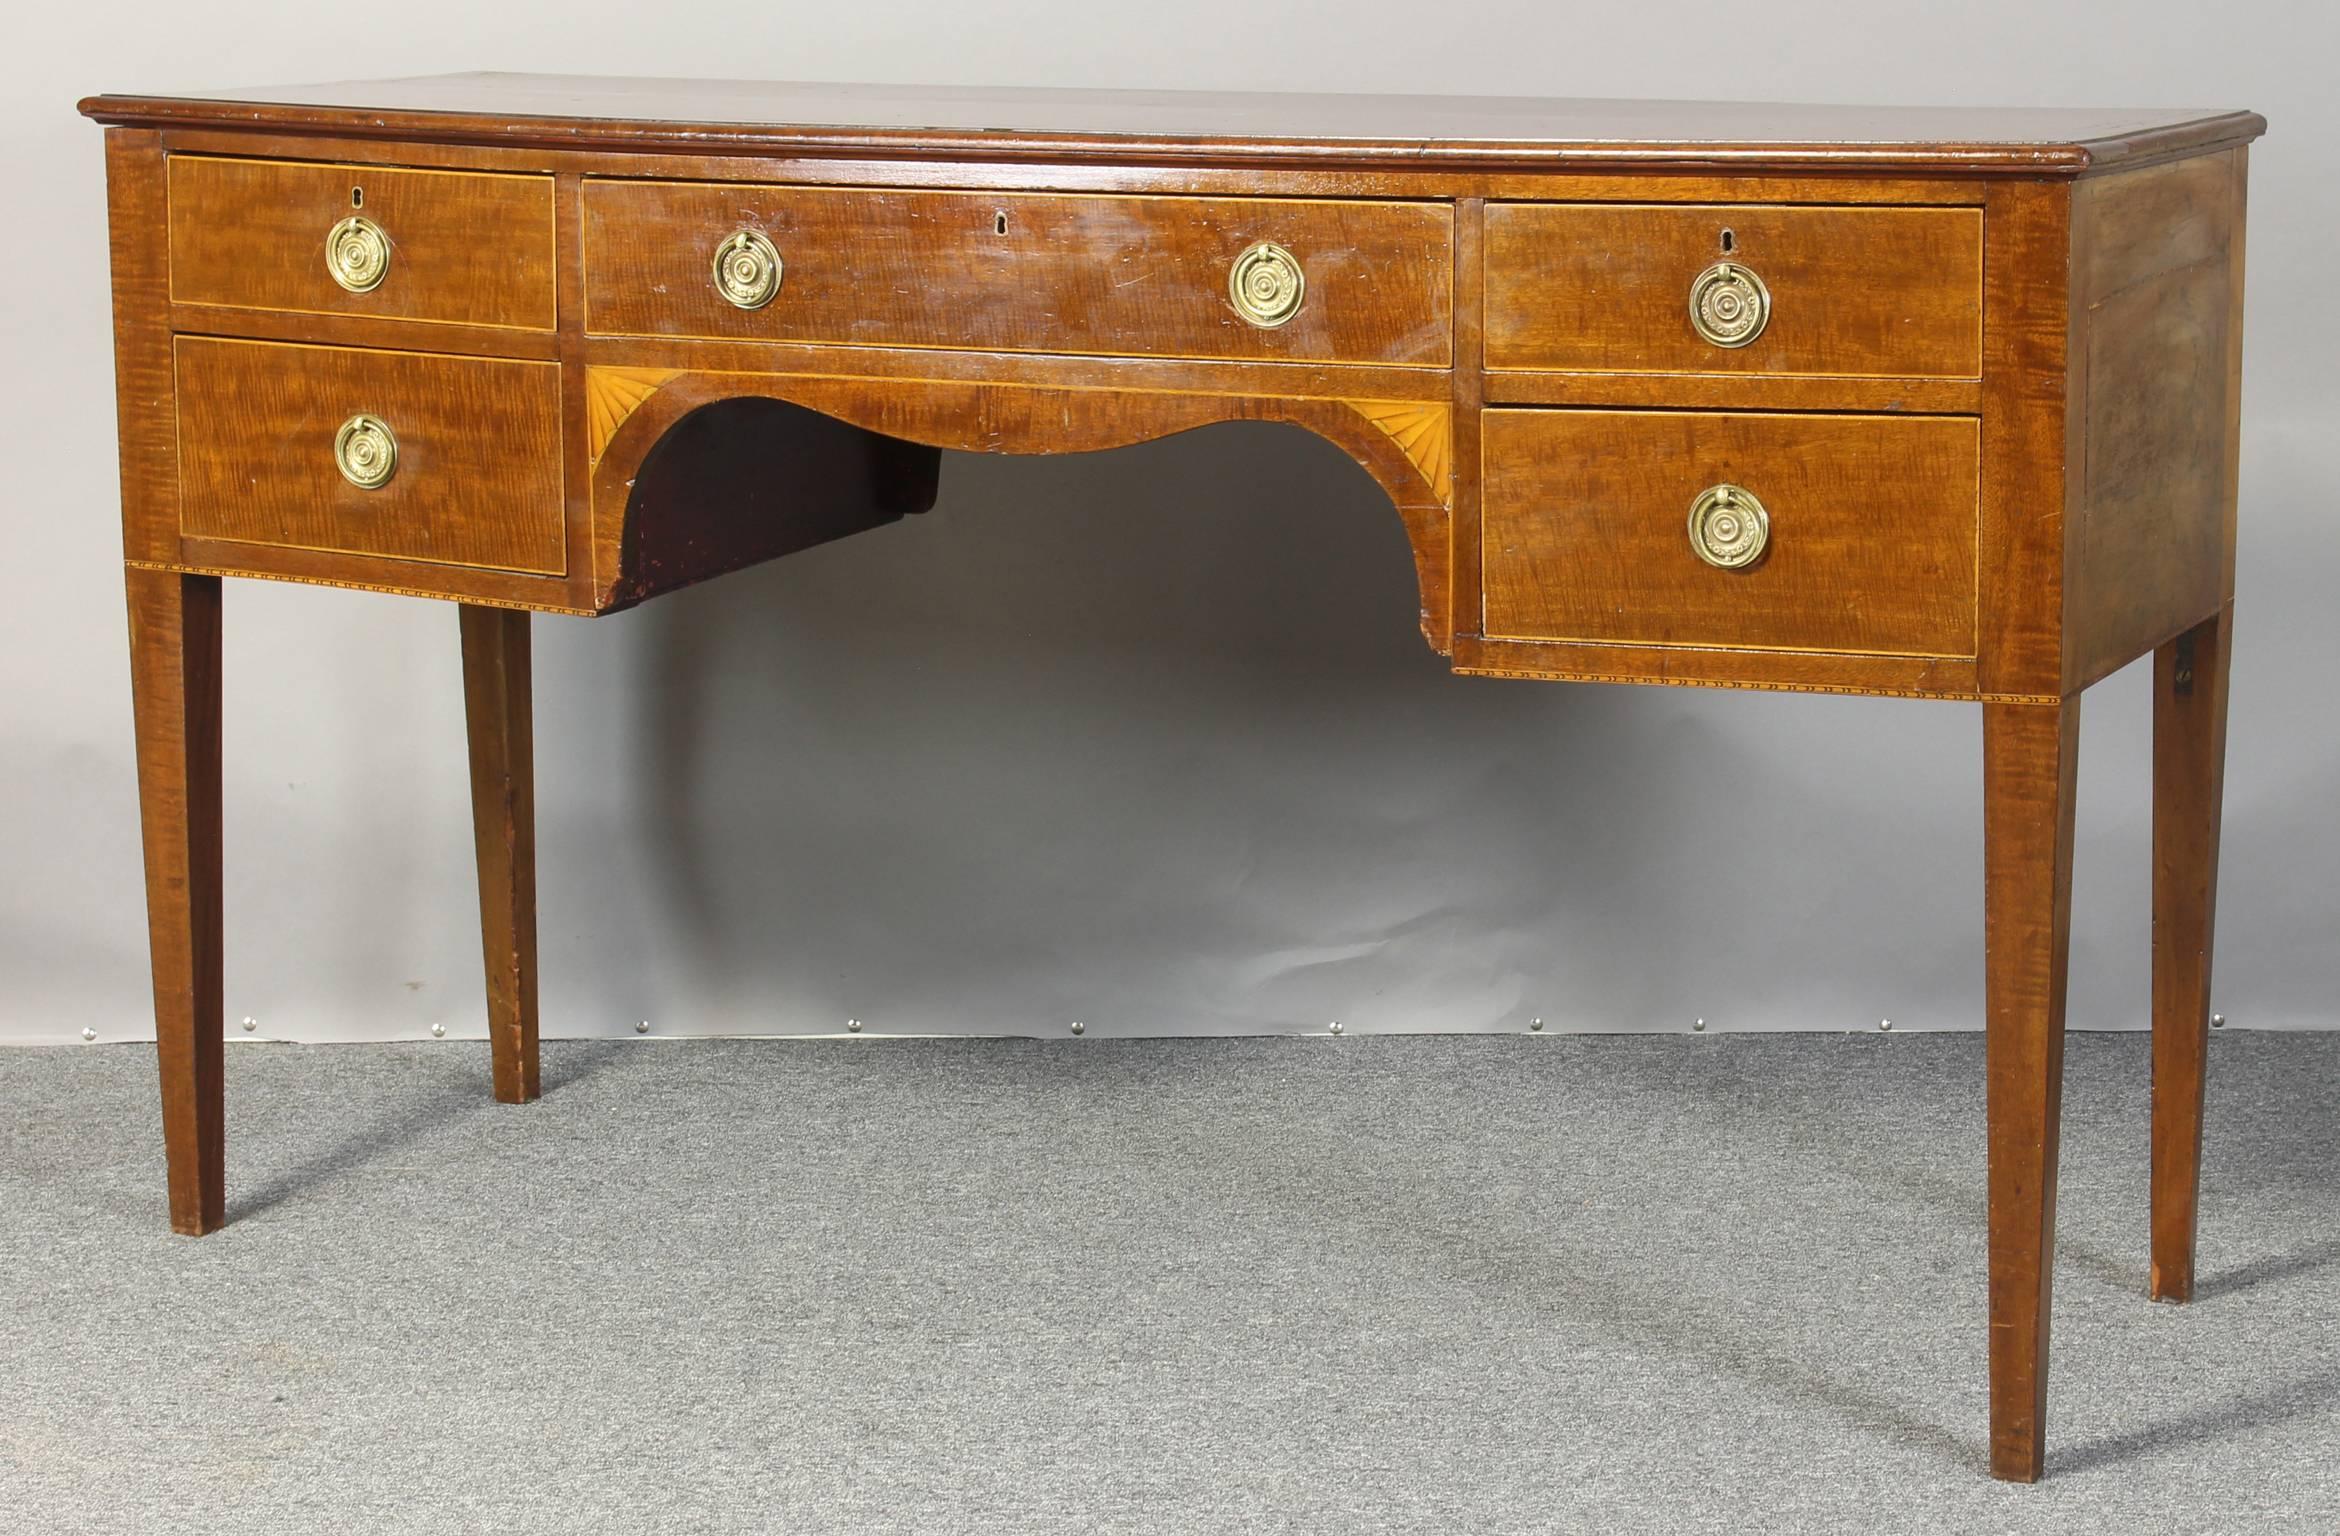 A mid-19th century English mahogany five drawer server or low sideboard accented with satinwood inlay and original brass hardware resting in square tapering legs.